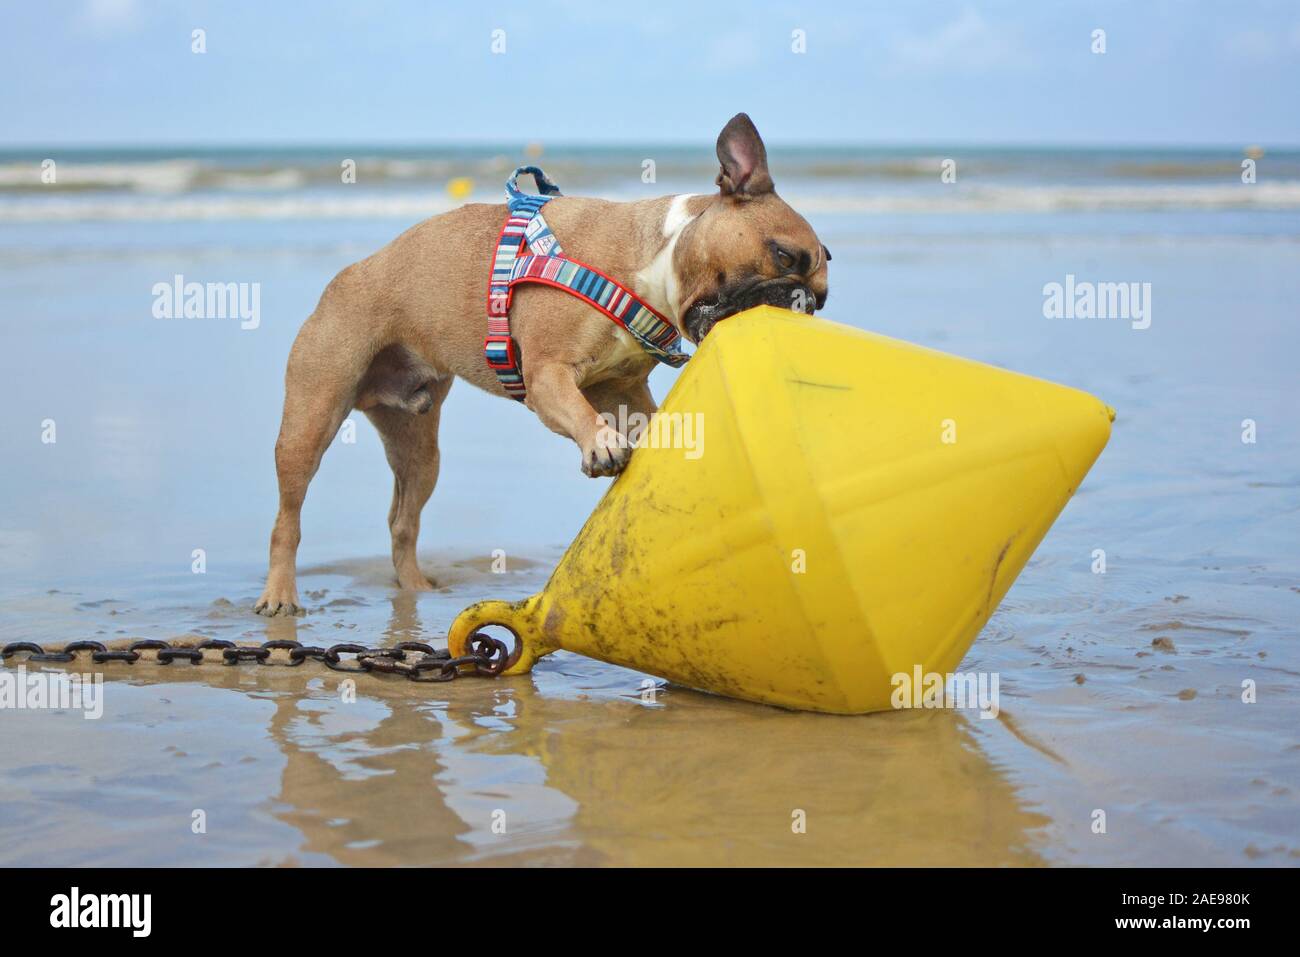 French Bulldog dog playing at beach trying to eat a large yellow buoy Stock Photo